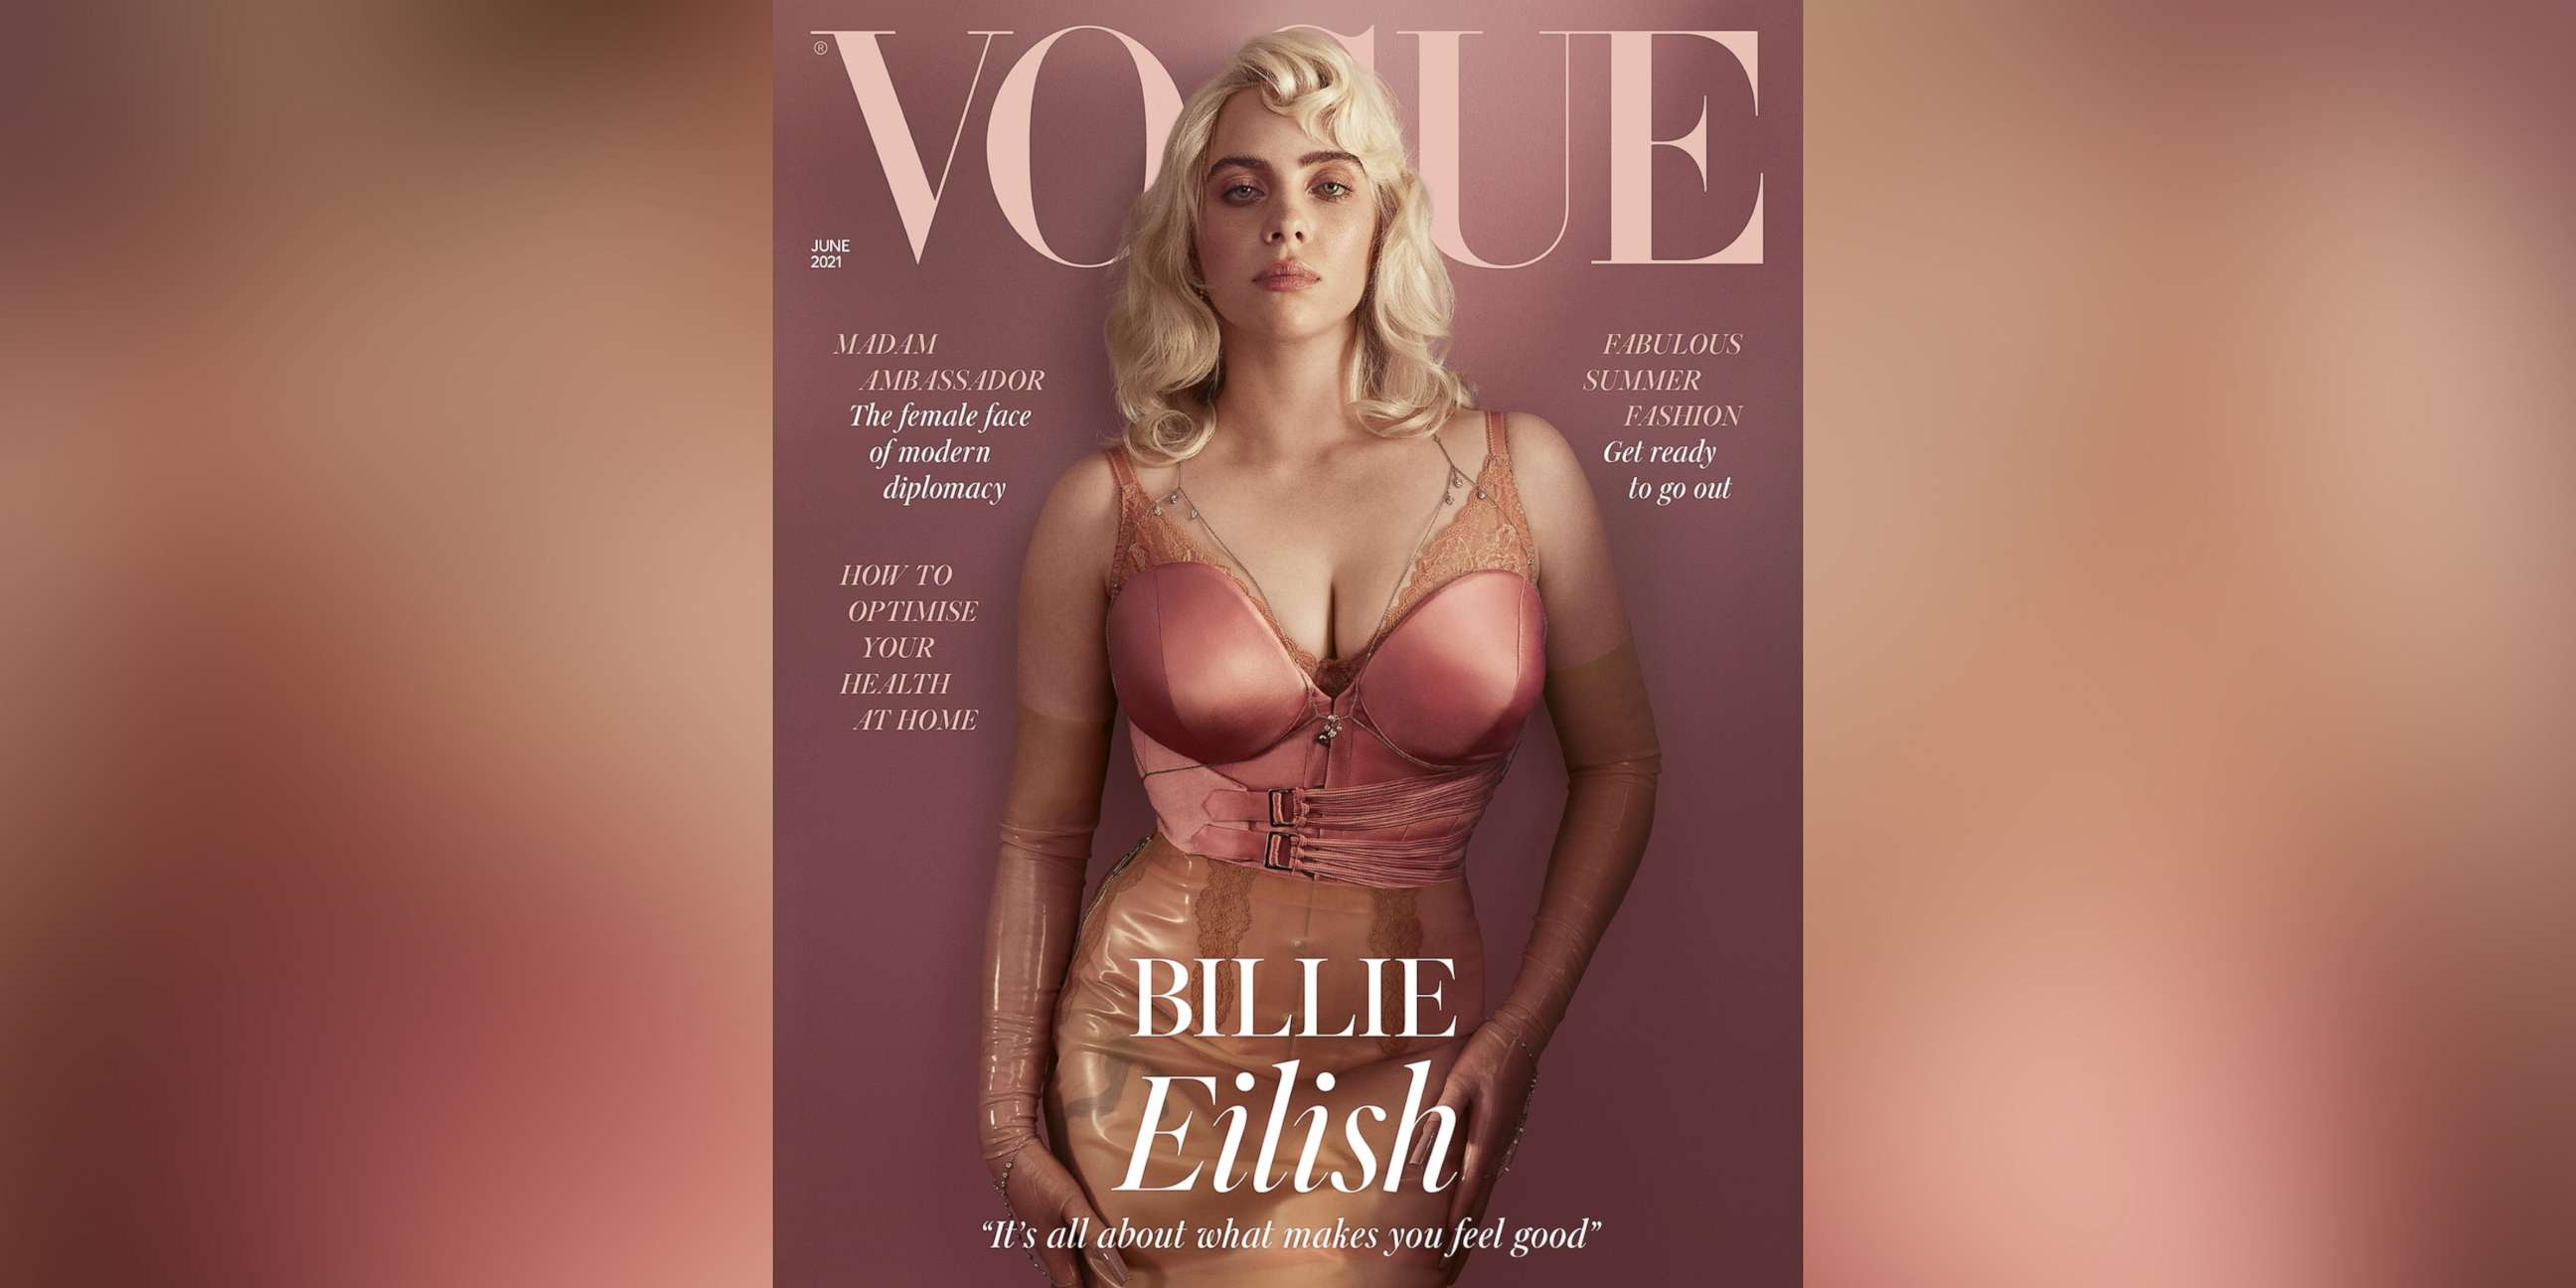 PHOTO: Pop star Billie Eilish is featured on the cover of the June 2021 issue of British Vogue magazine.